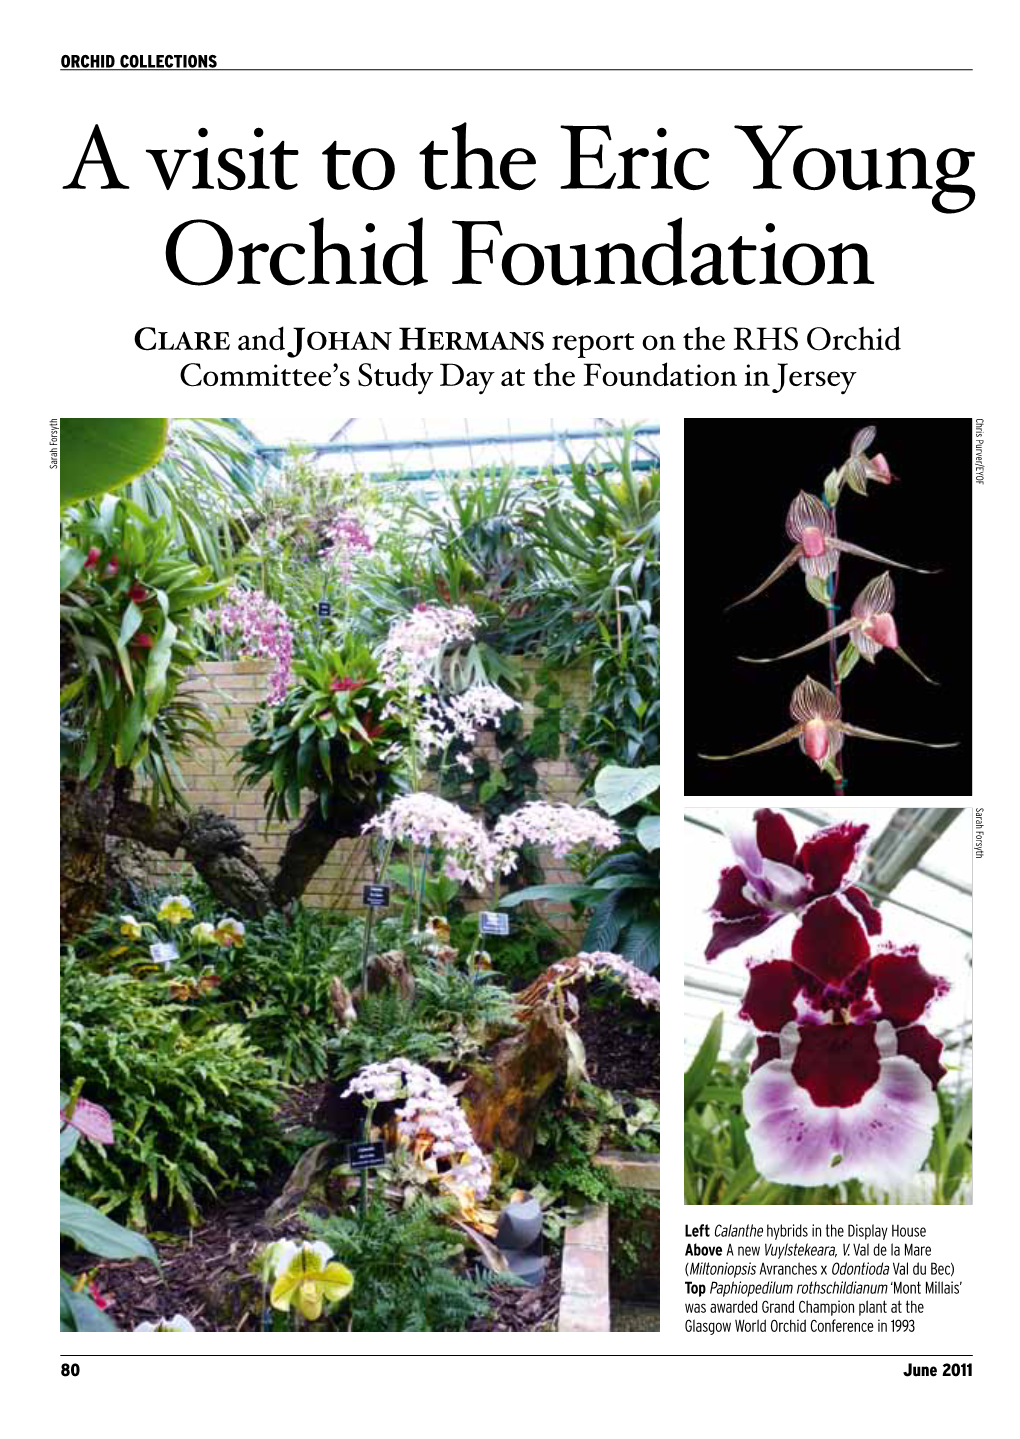 A Visit to the Eric Young Orchid Foundation